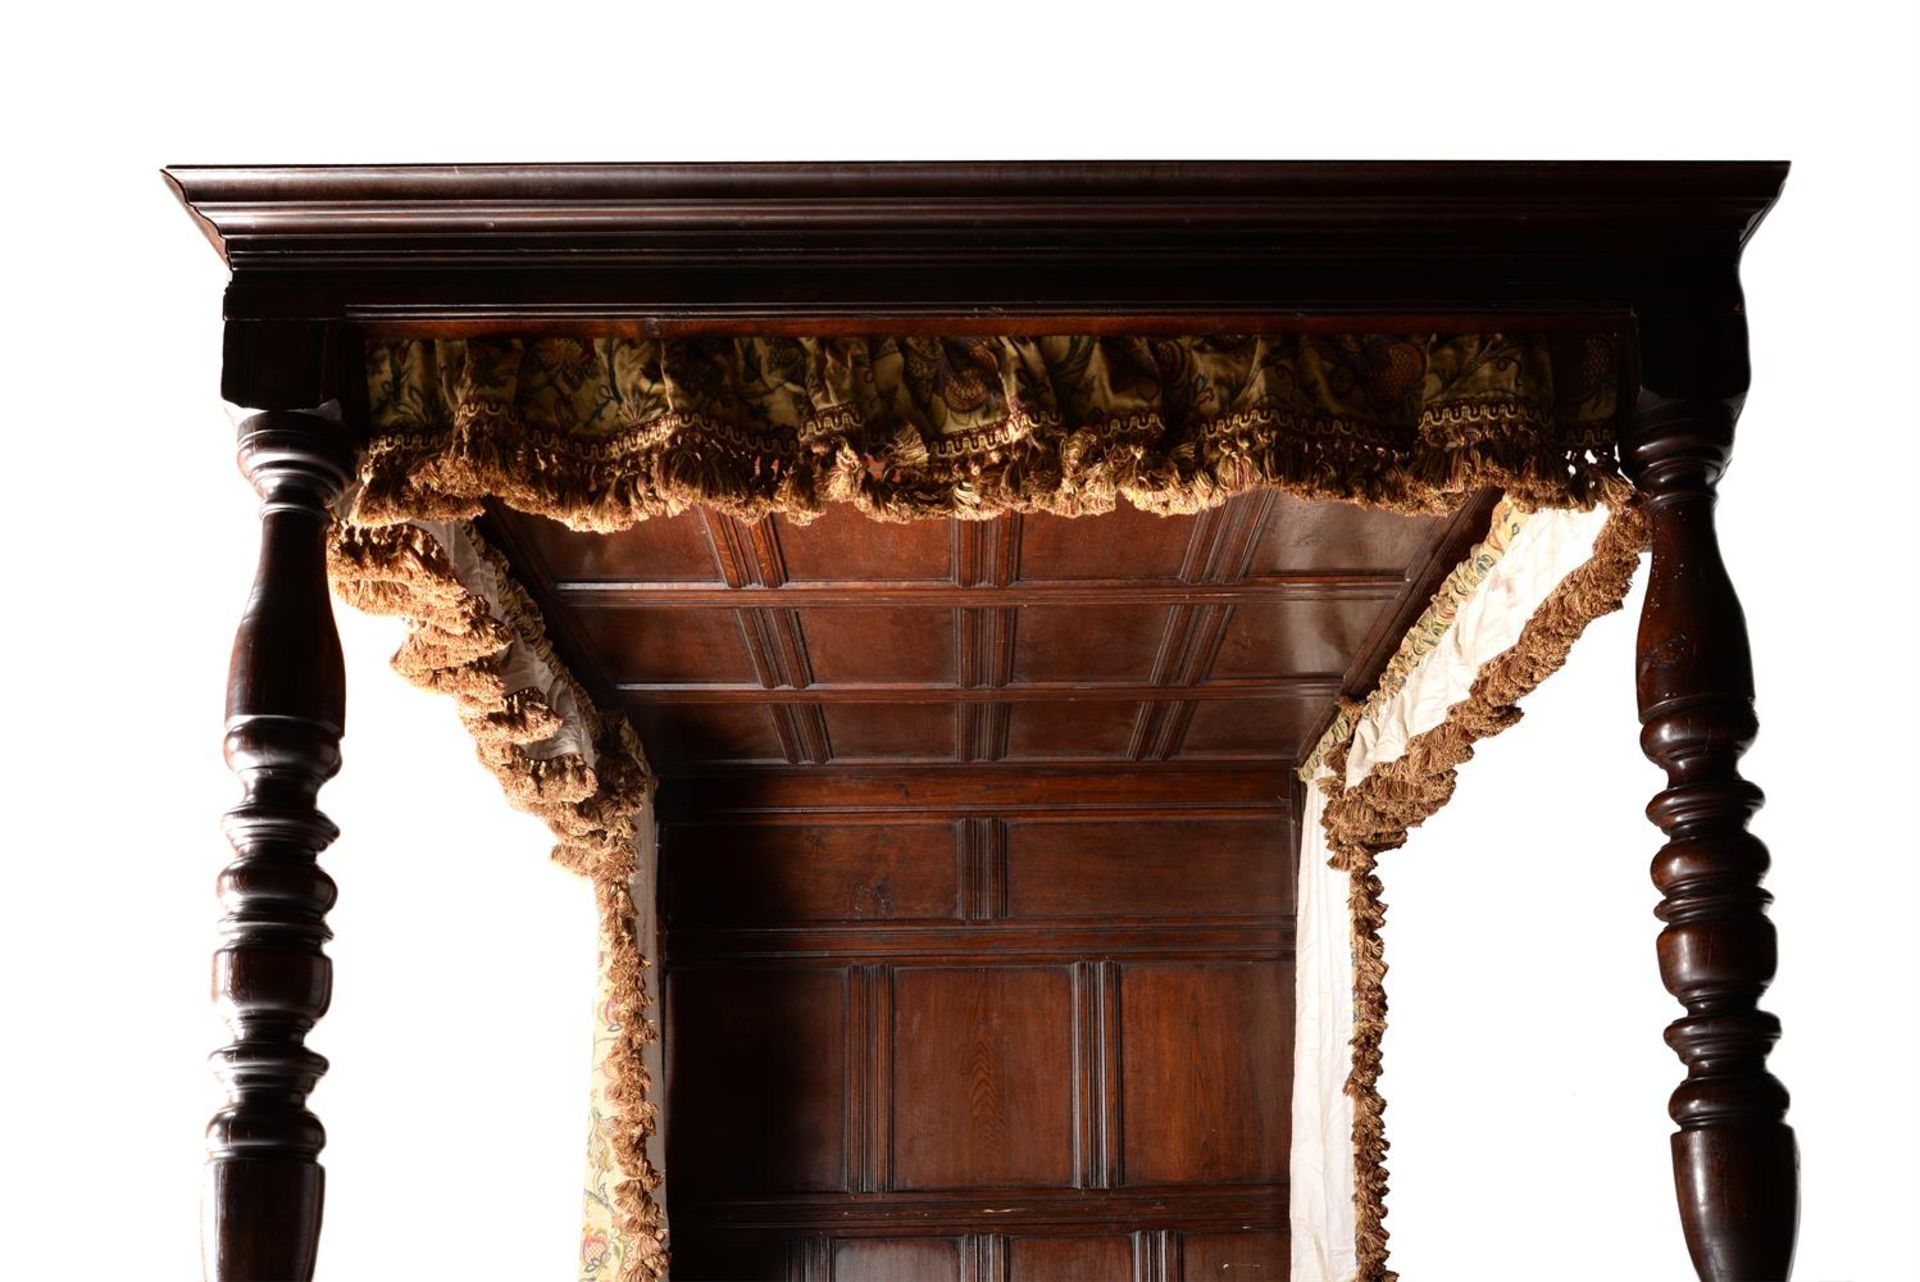 AN OAK FOUR POST BED, IN THE STUART MANNER, COMPLETE WITH HANGINGS, IN 17TH CENTURY STYLE - Image 5 of 9